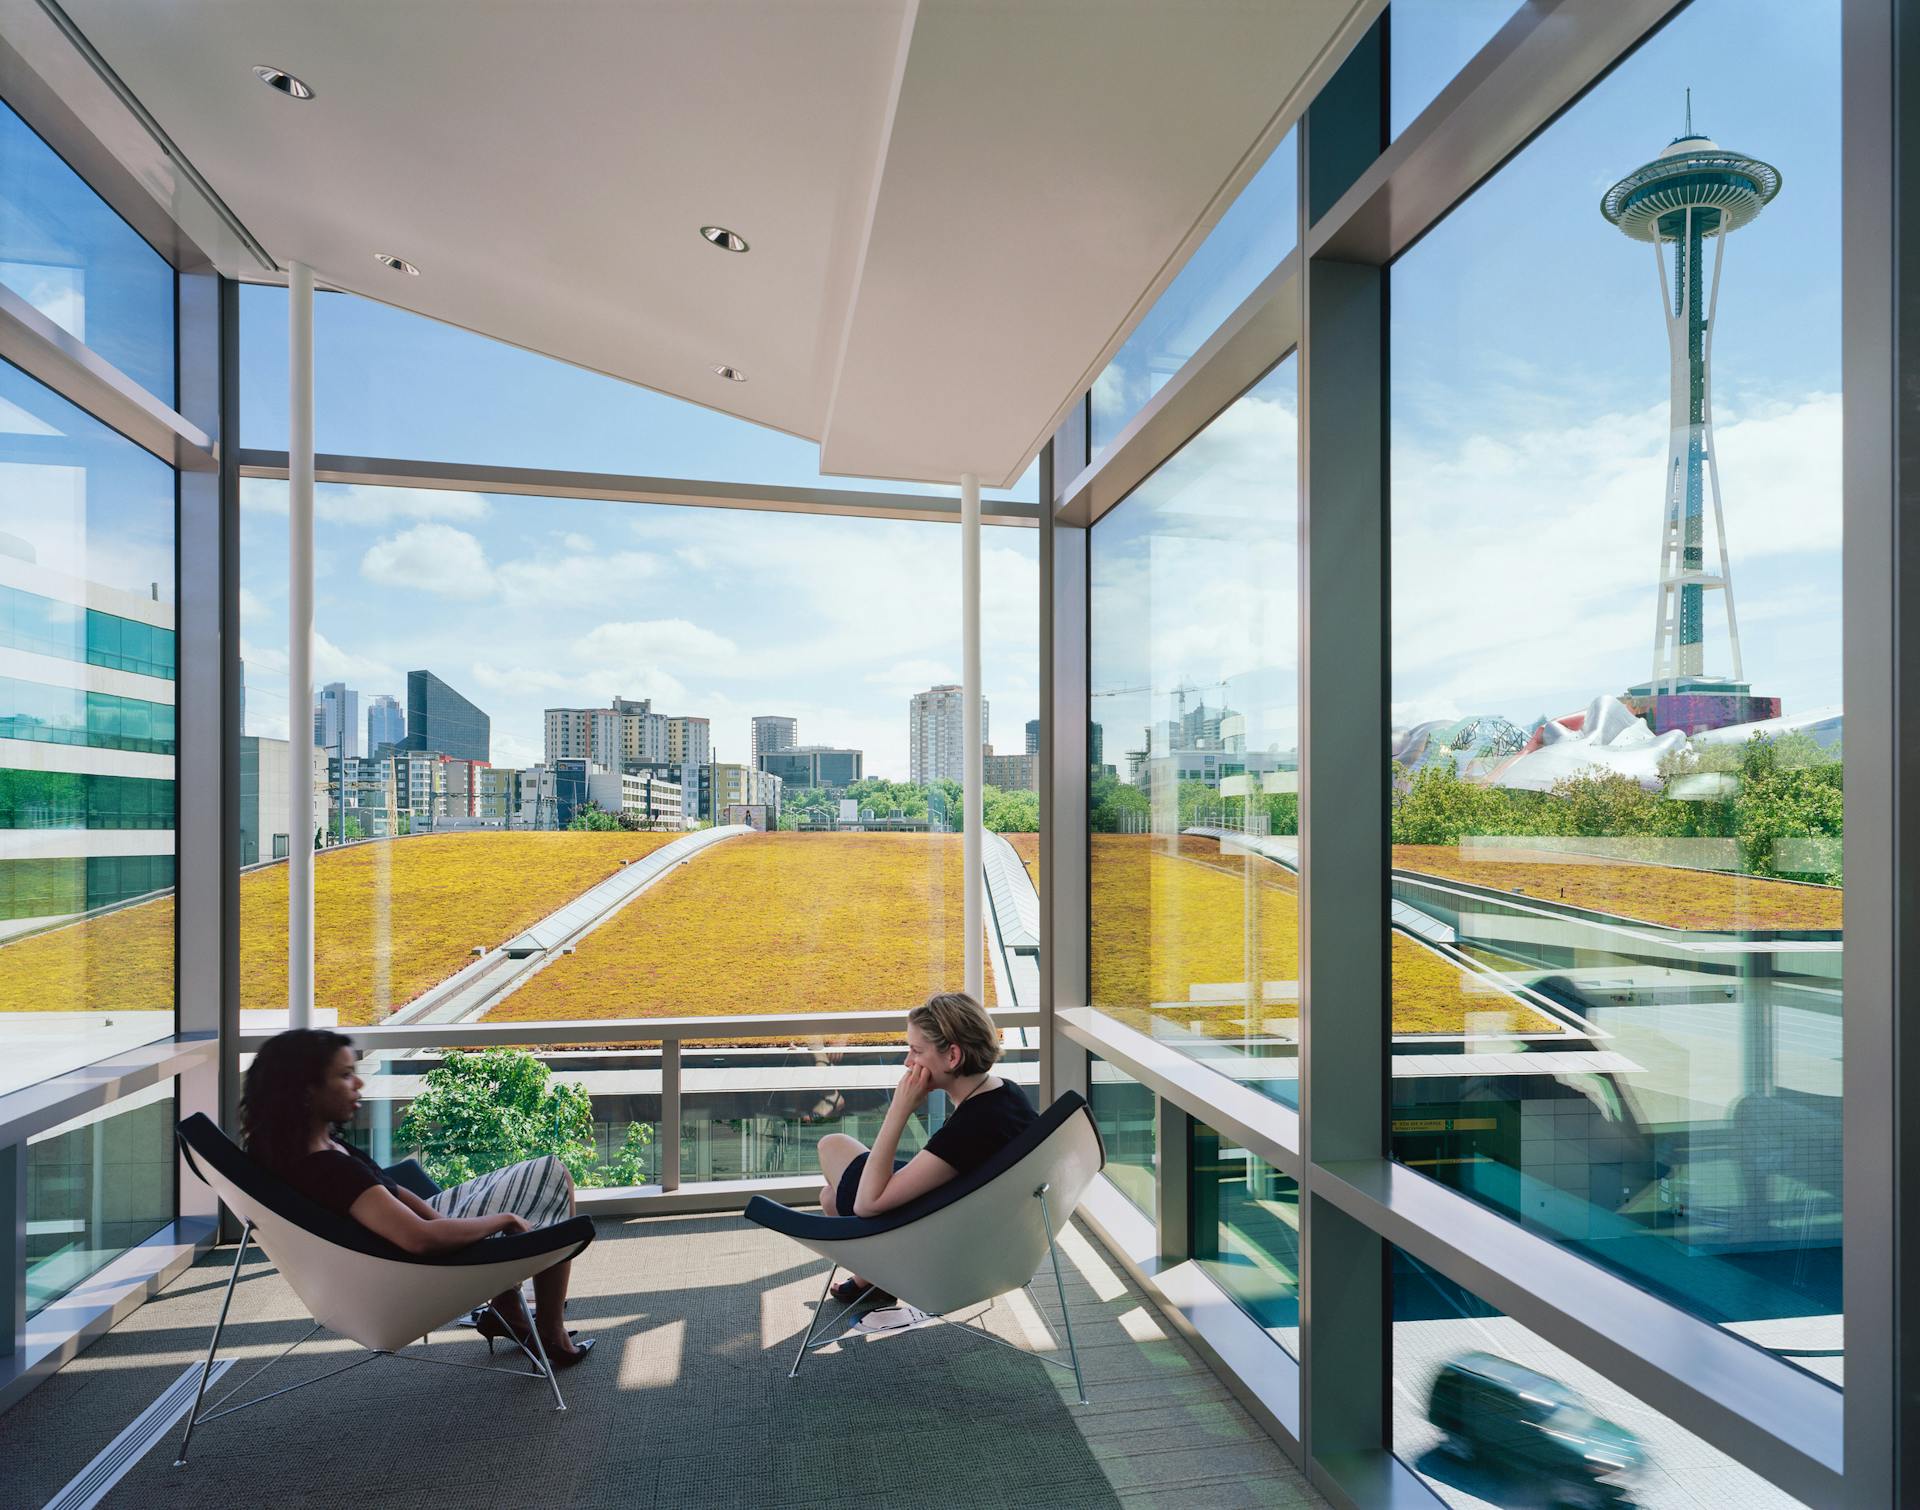 Informal meeting spaces at the end of each breezeway overlook downtown Seattle.,,,, Photographer: Timothy Hursley